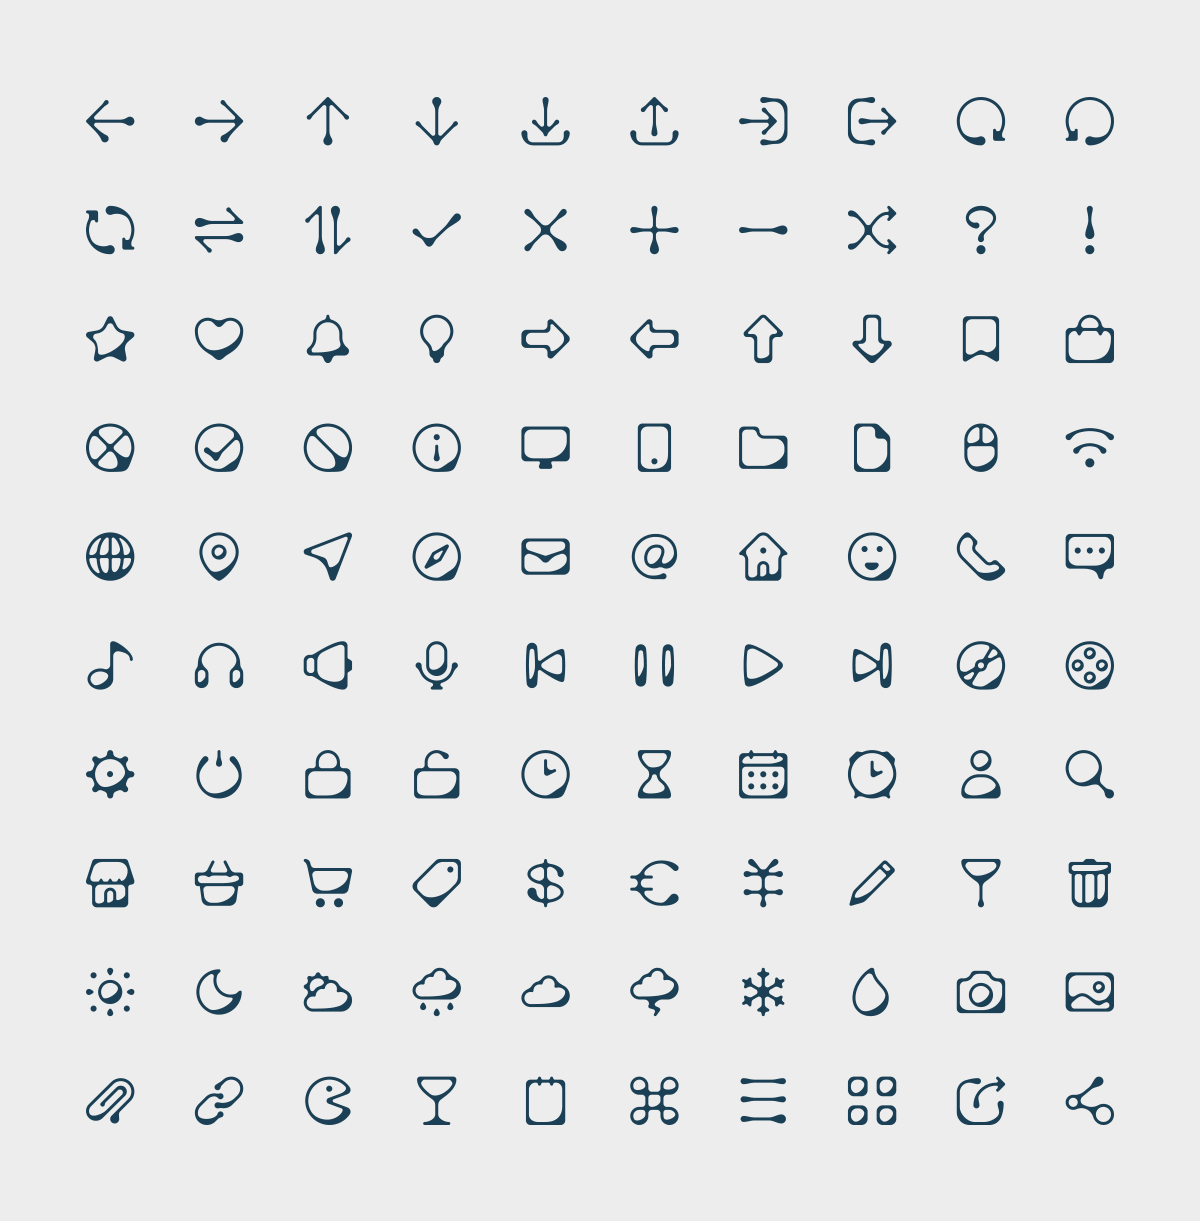 100 Ink Style Icons